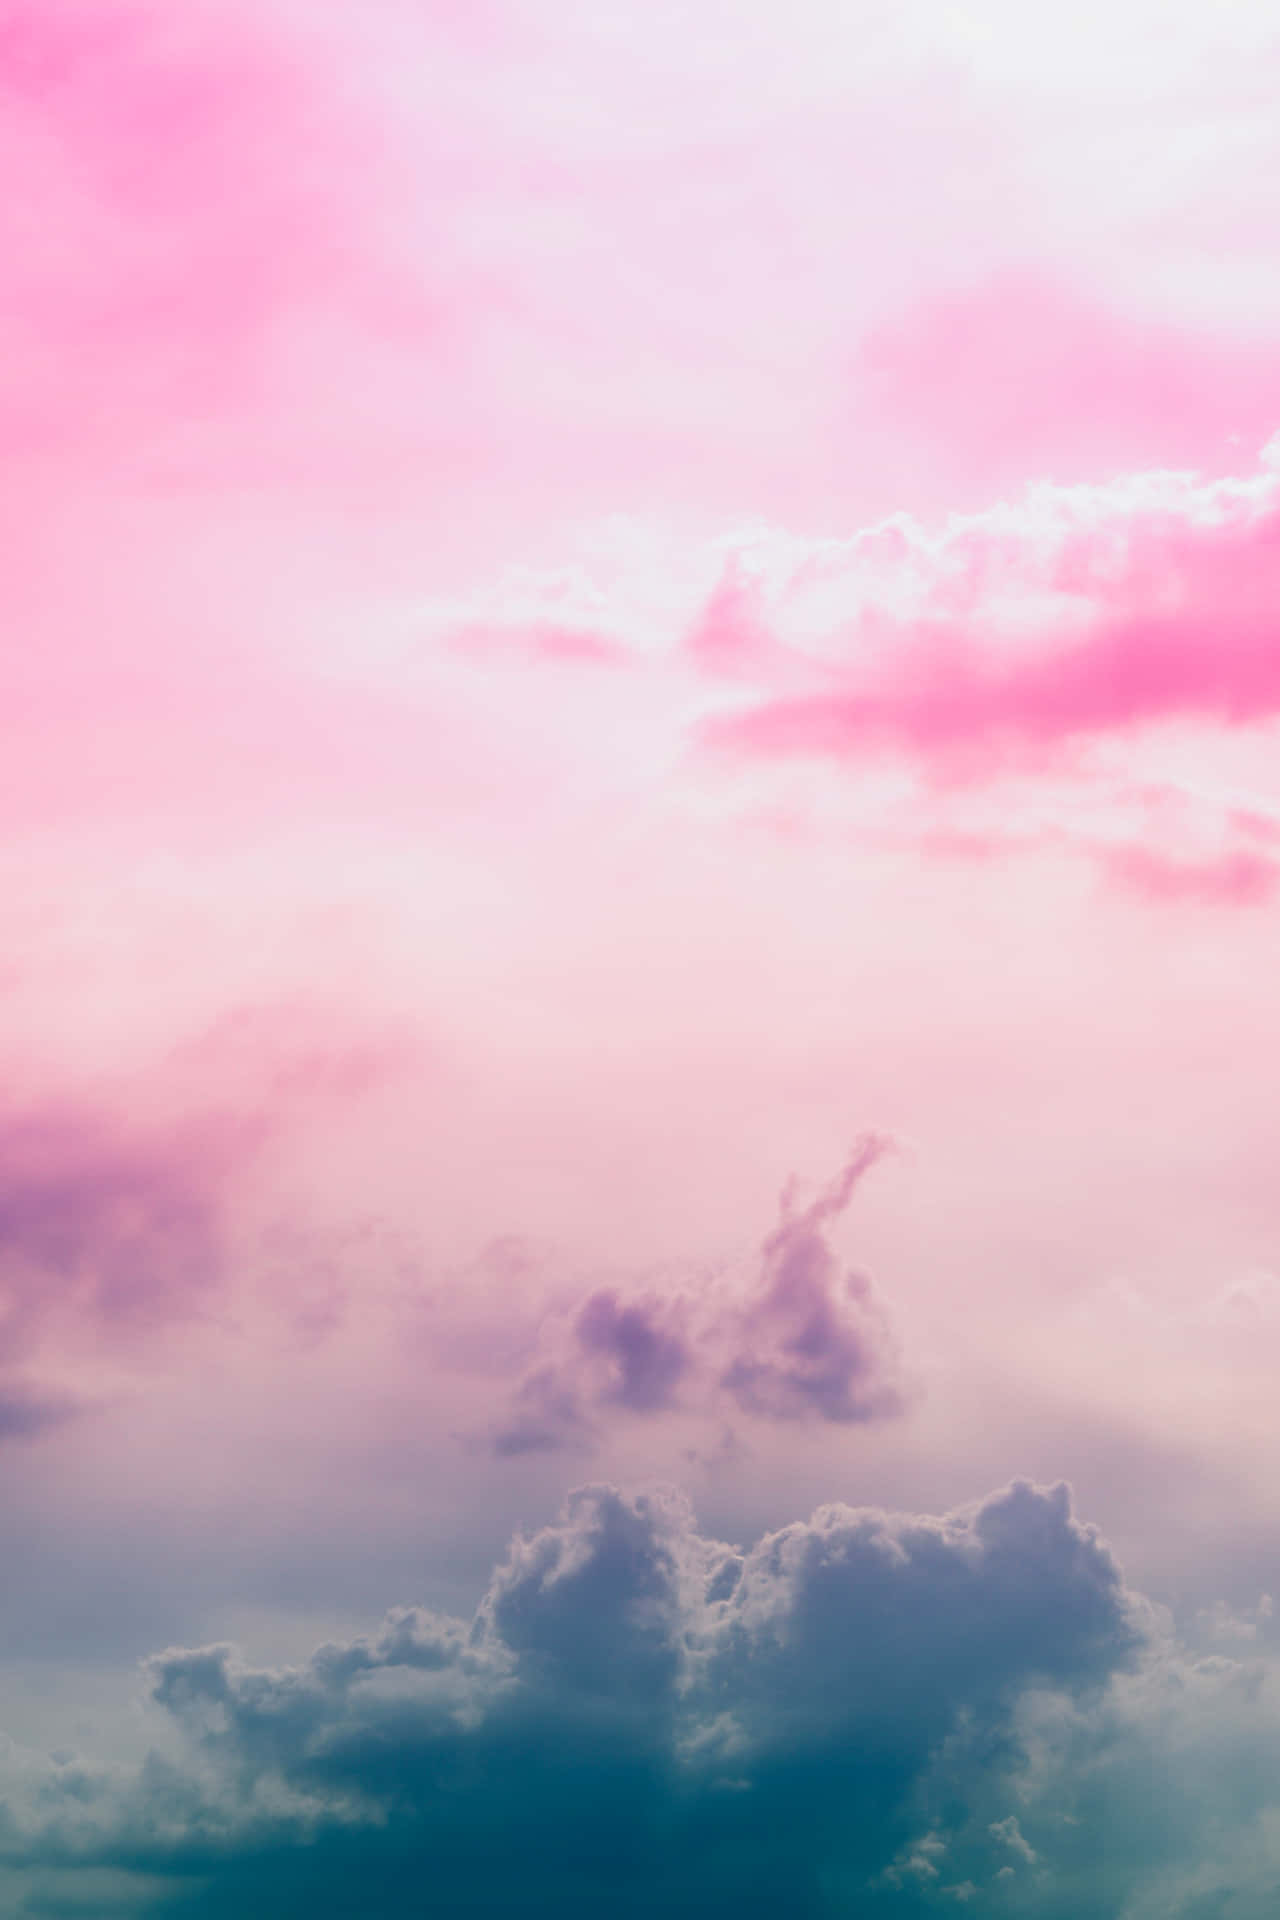 A beautiful view of pink and blue clouds in the sky Wallpaper